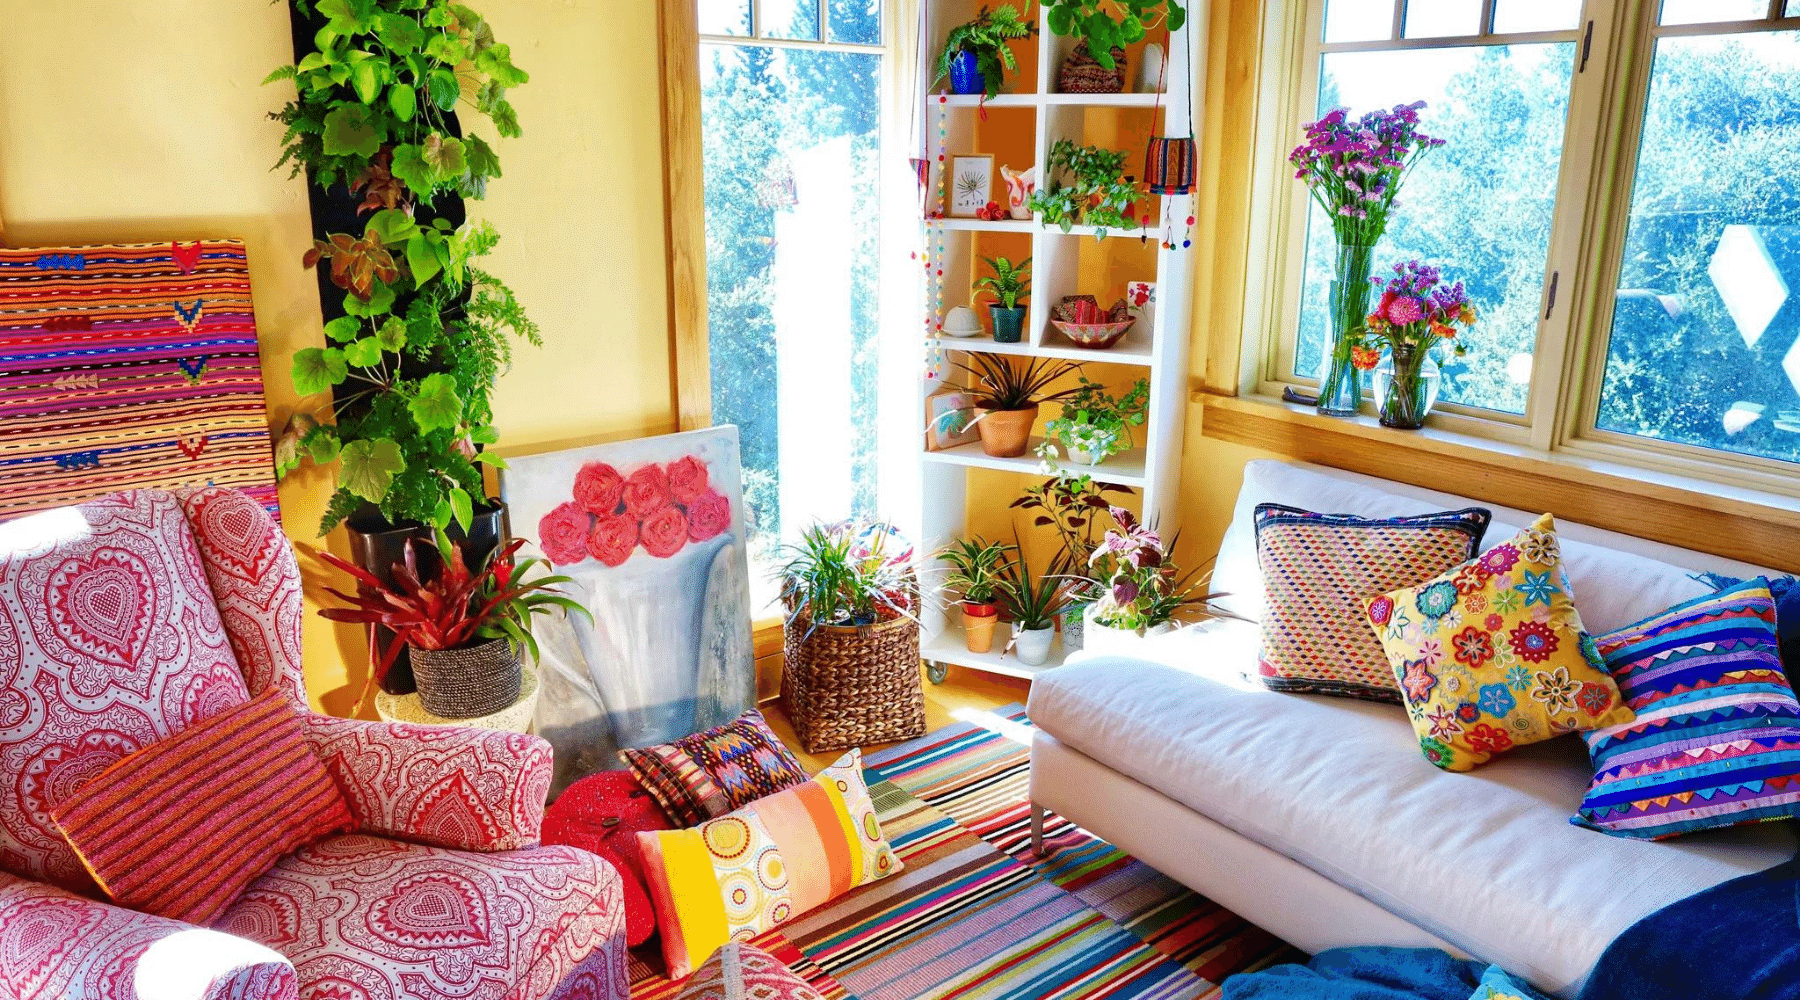 Top 6 Ways To Decorate Like A Boho Pro – Planted Places